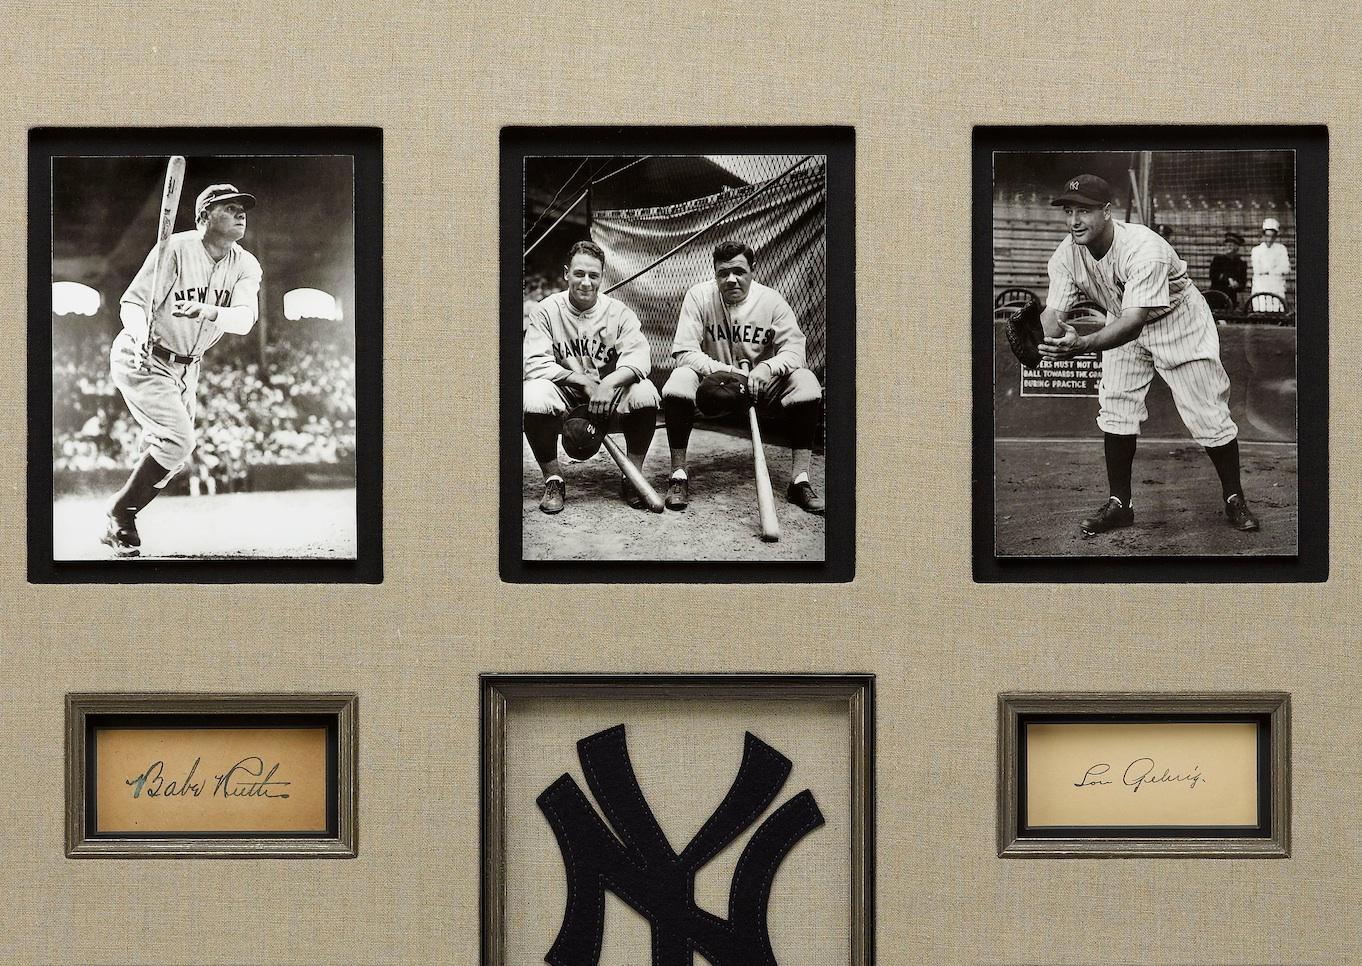 Celebrating two of America’s most famous baseball players, this collage features authentic signatures by Babe Ruth and Lou Gehrig. Both signatures are presented with photographs of the influential athletes and framed according to the highest